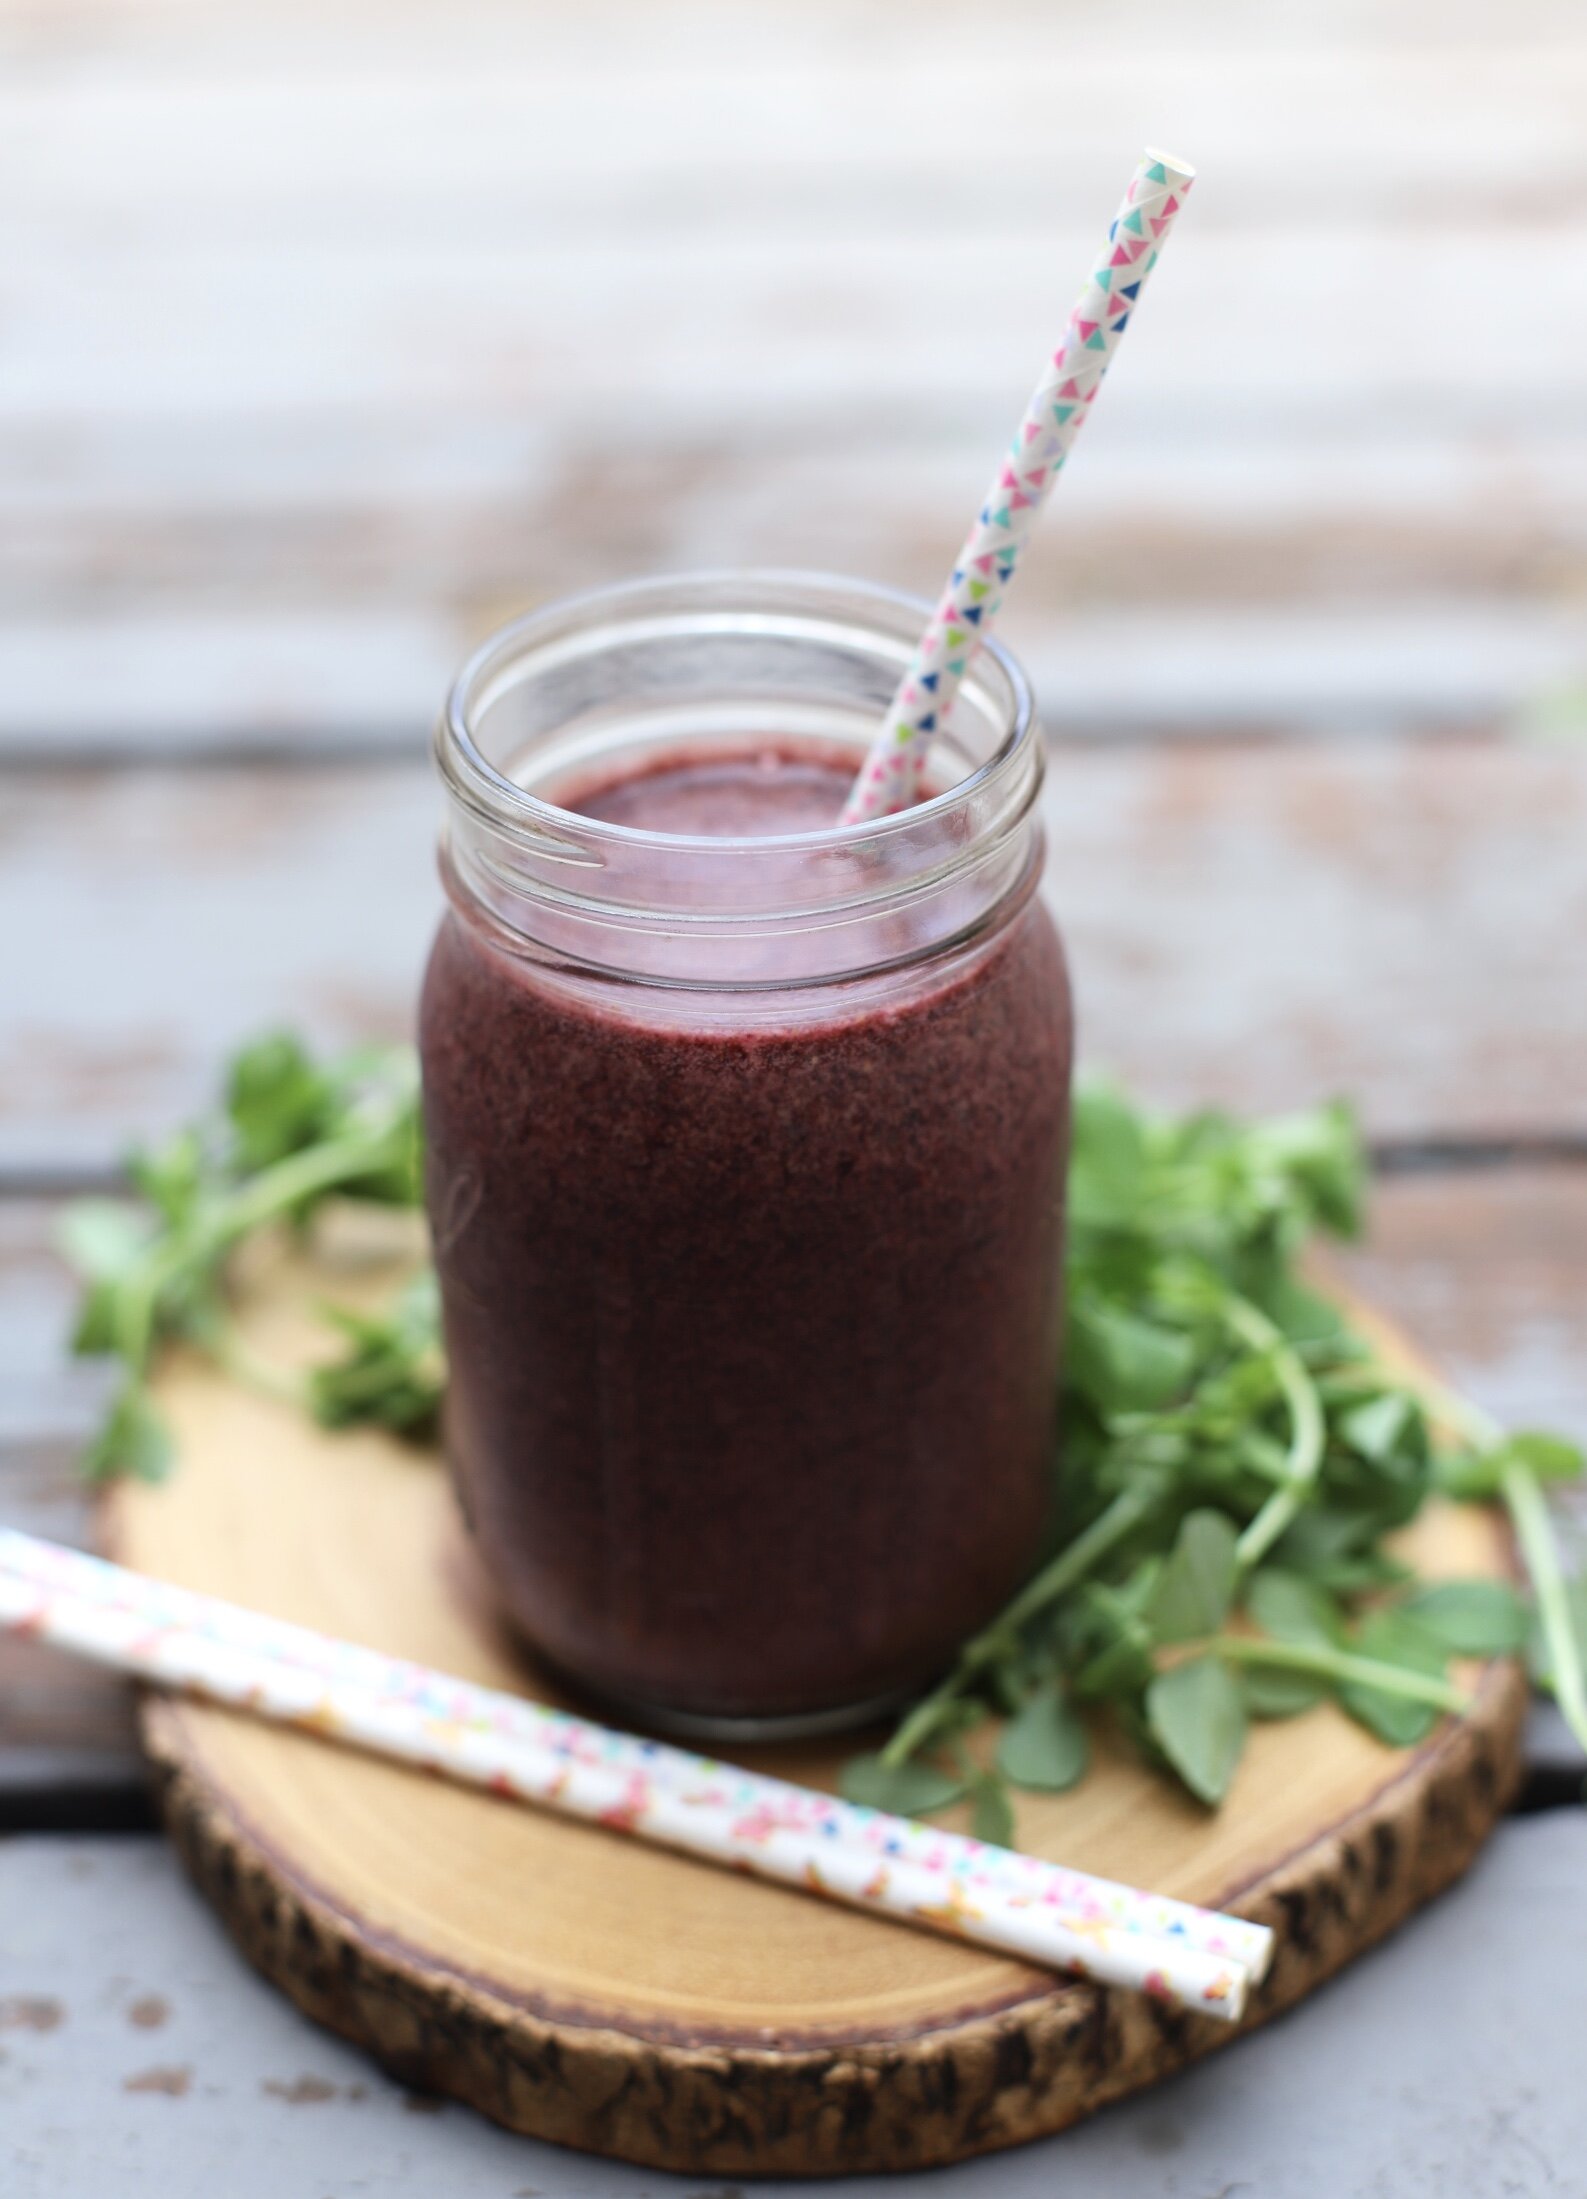 Mixed Berries and Pea Shoot Smoothie